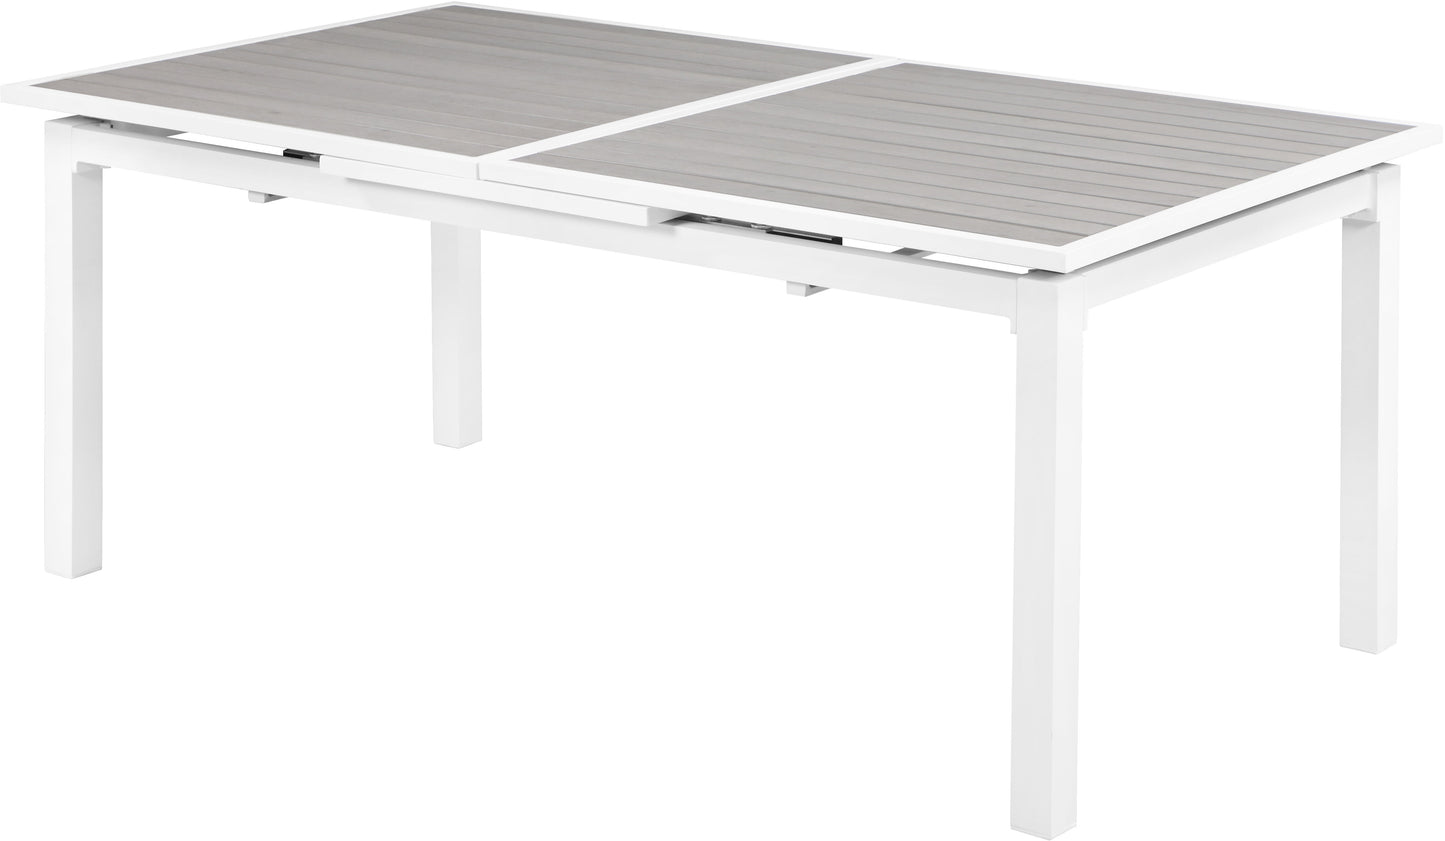 Nizuc - Outdoor Patio Extendable Dining Table